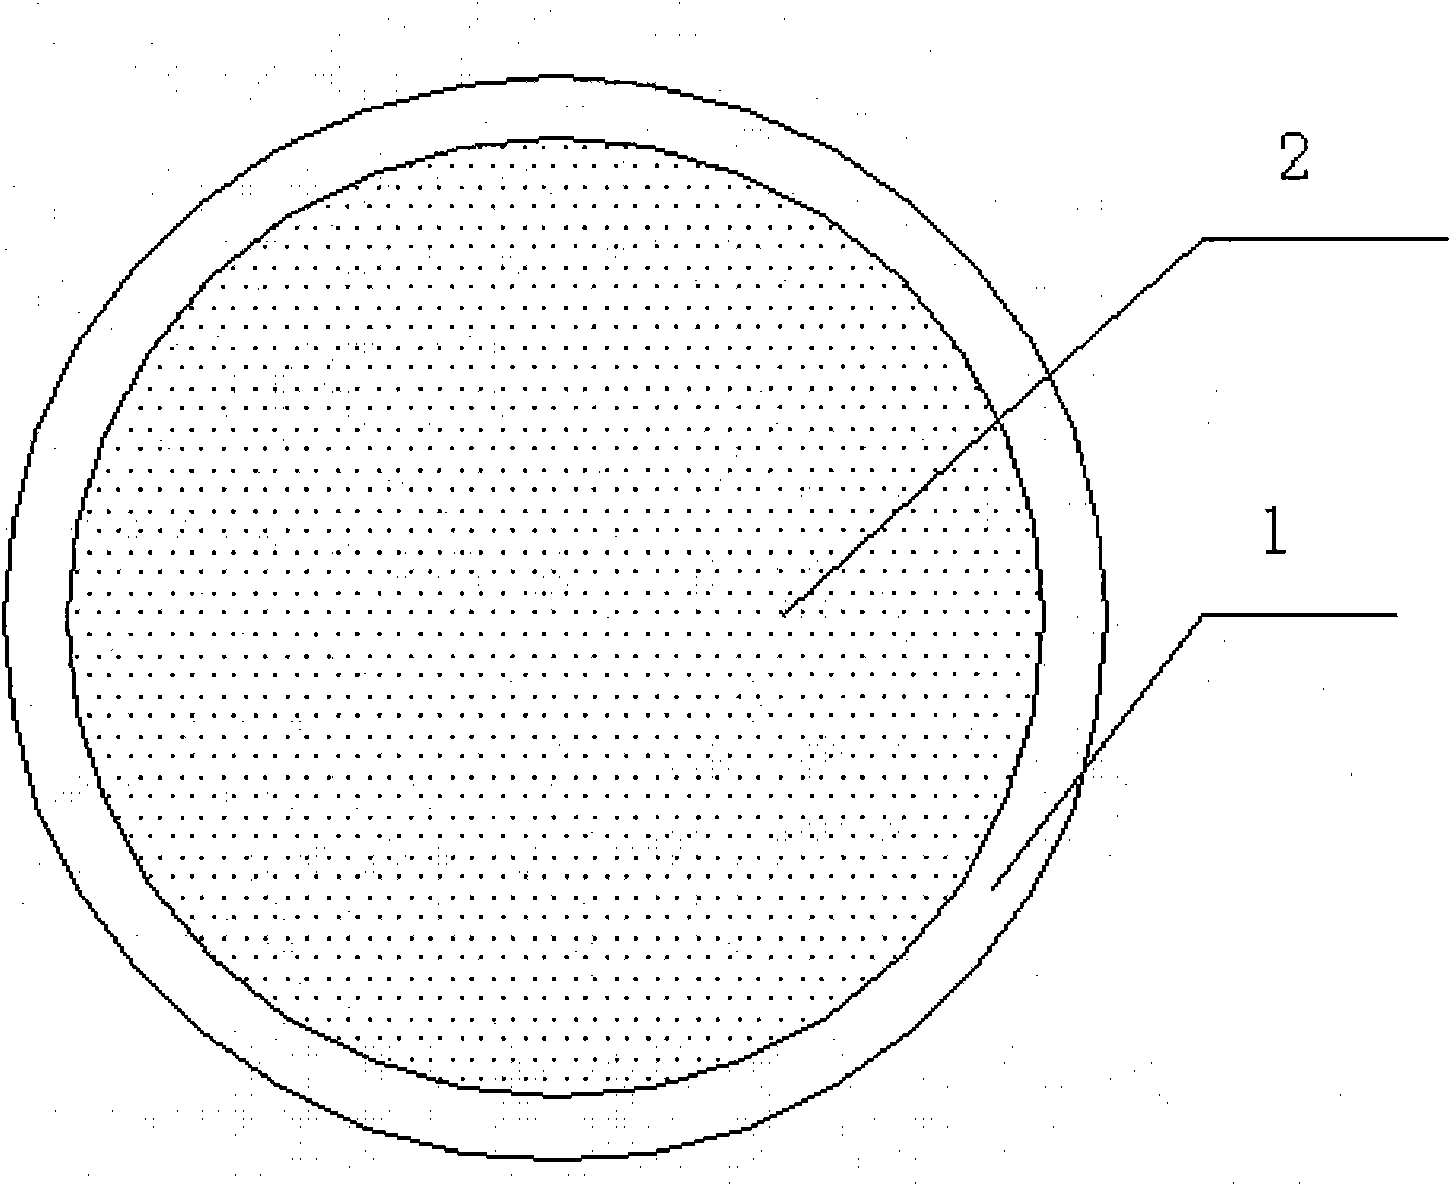 Recycled concrete member with additive and method for preparing same